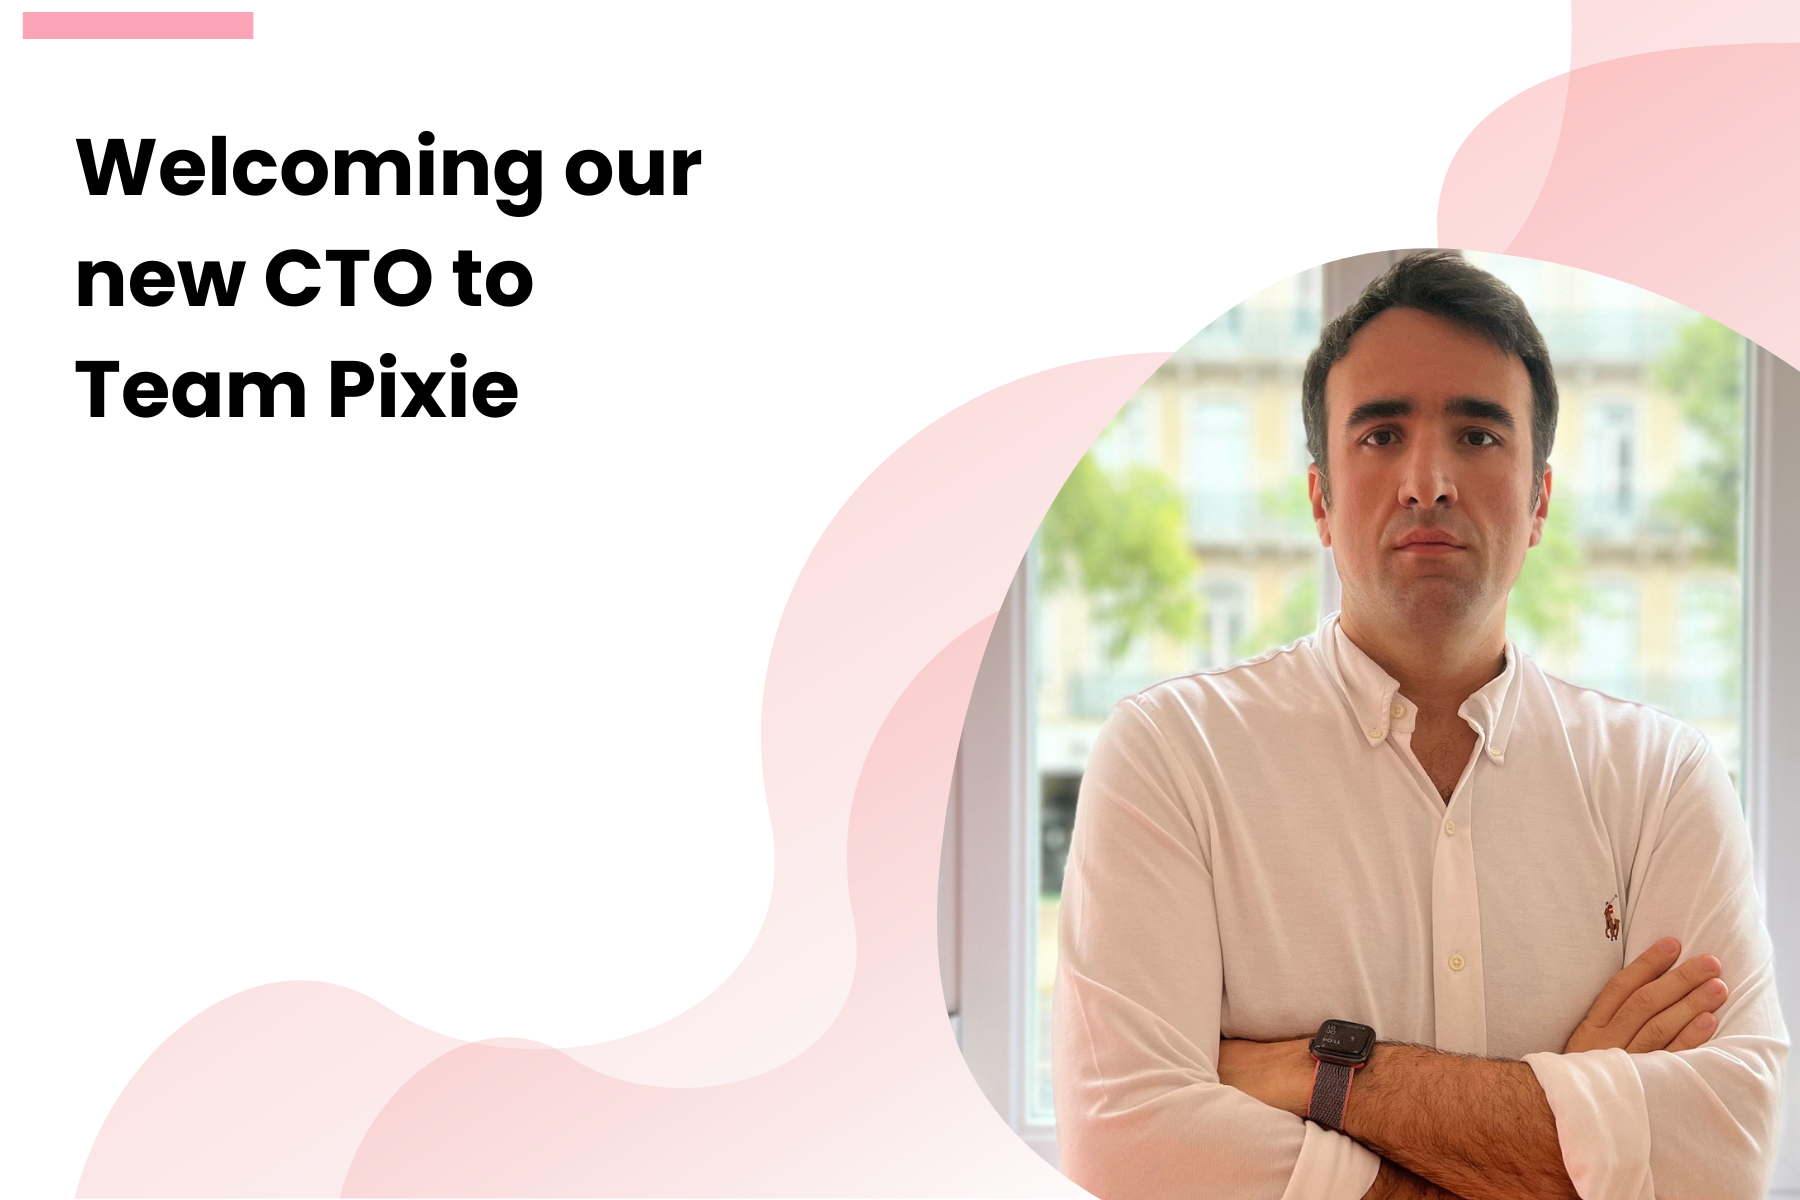 Welcoming Artur to team Pixie!